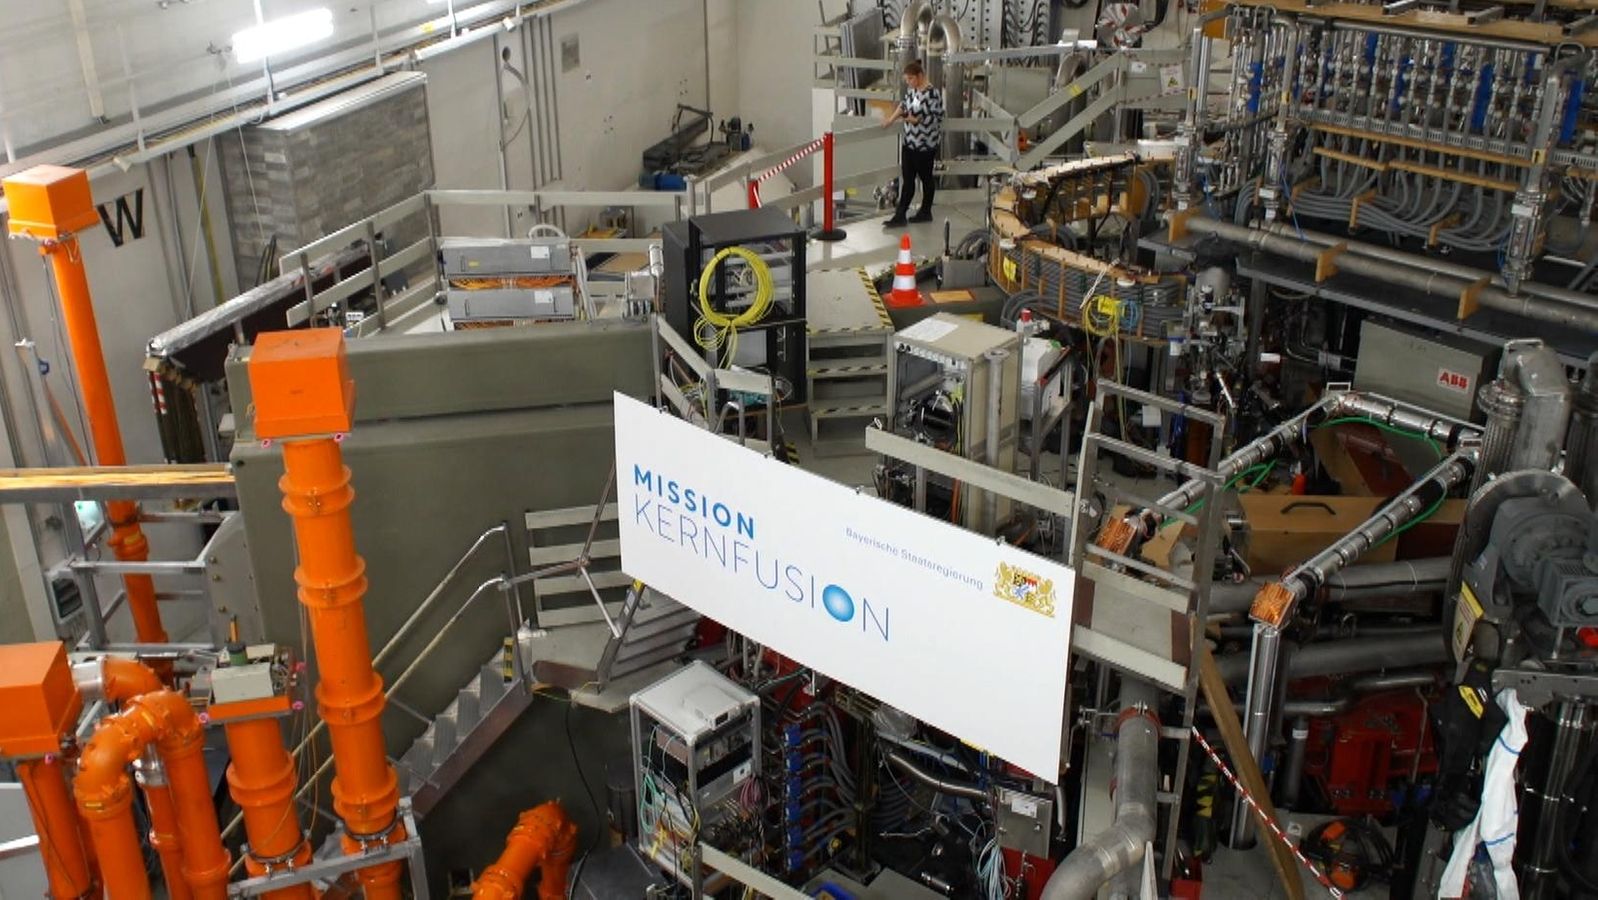 Bavaria wants a leading role in nuclear fusion research